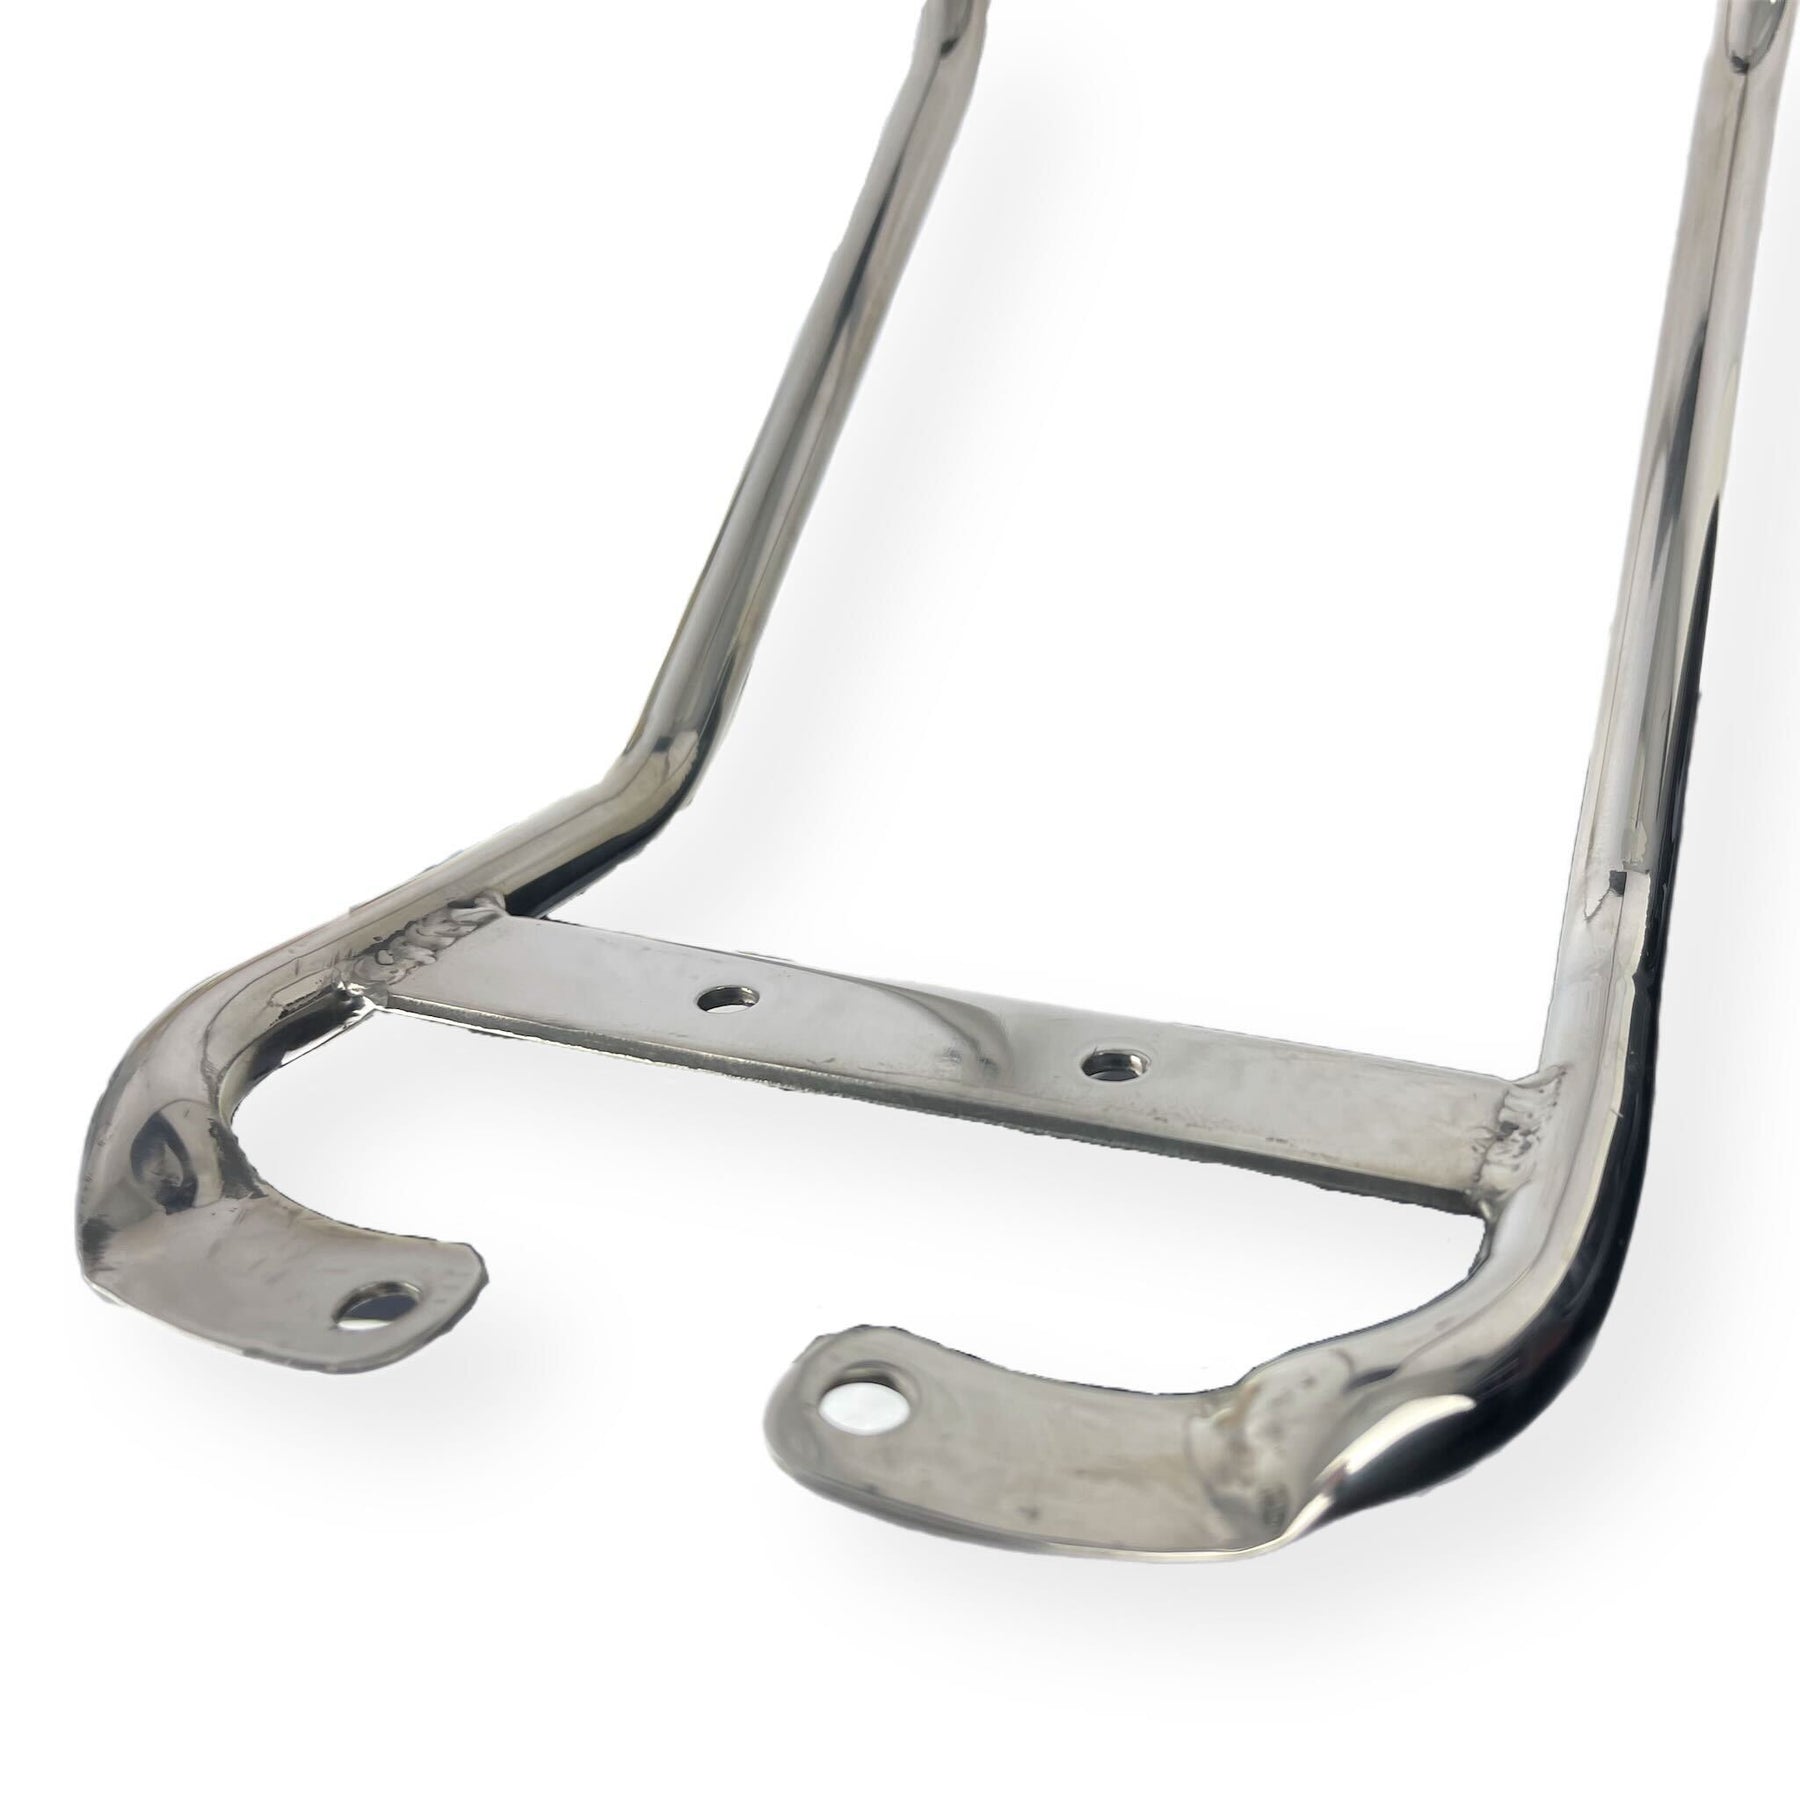 Lambretta Series 1 2 3 Backrest for Single Seats - Polished Stainless Steel